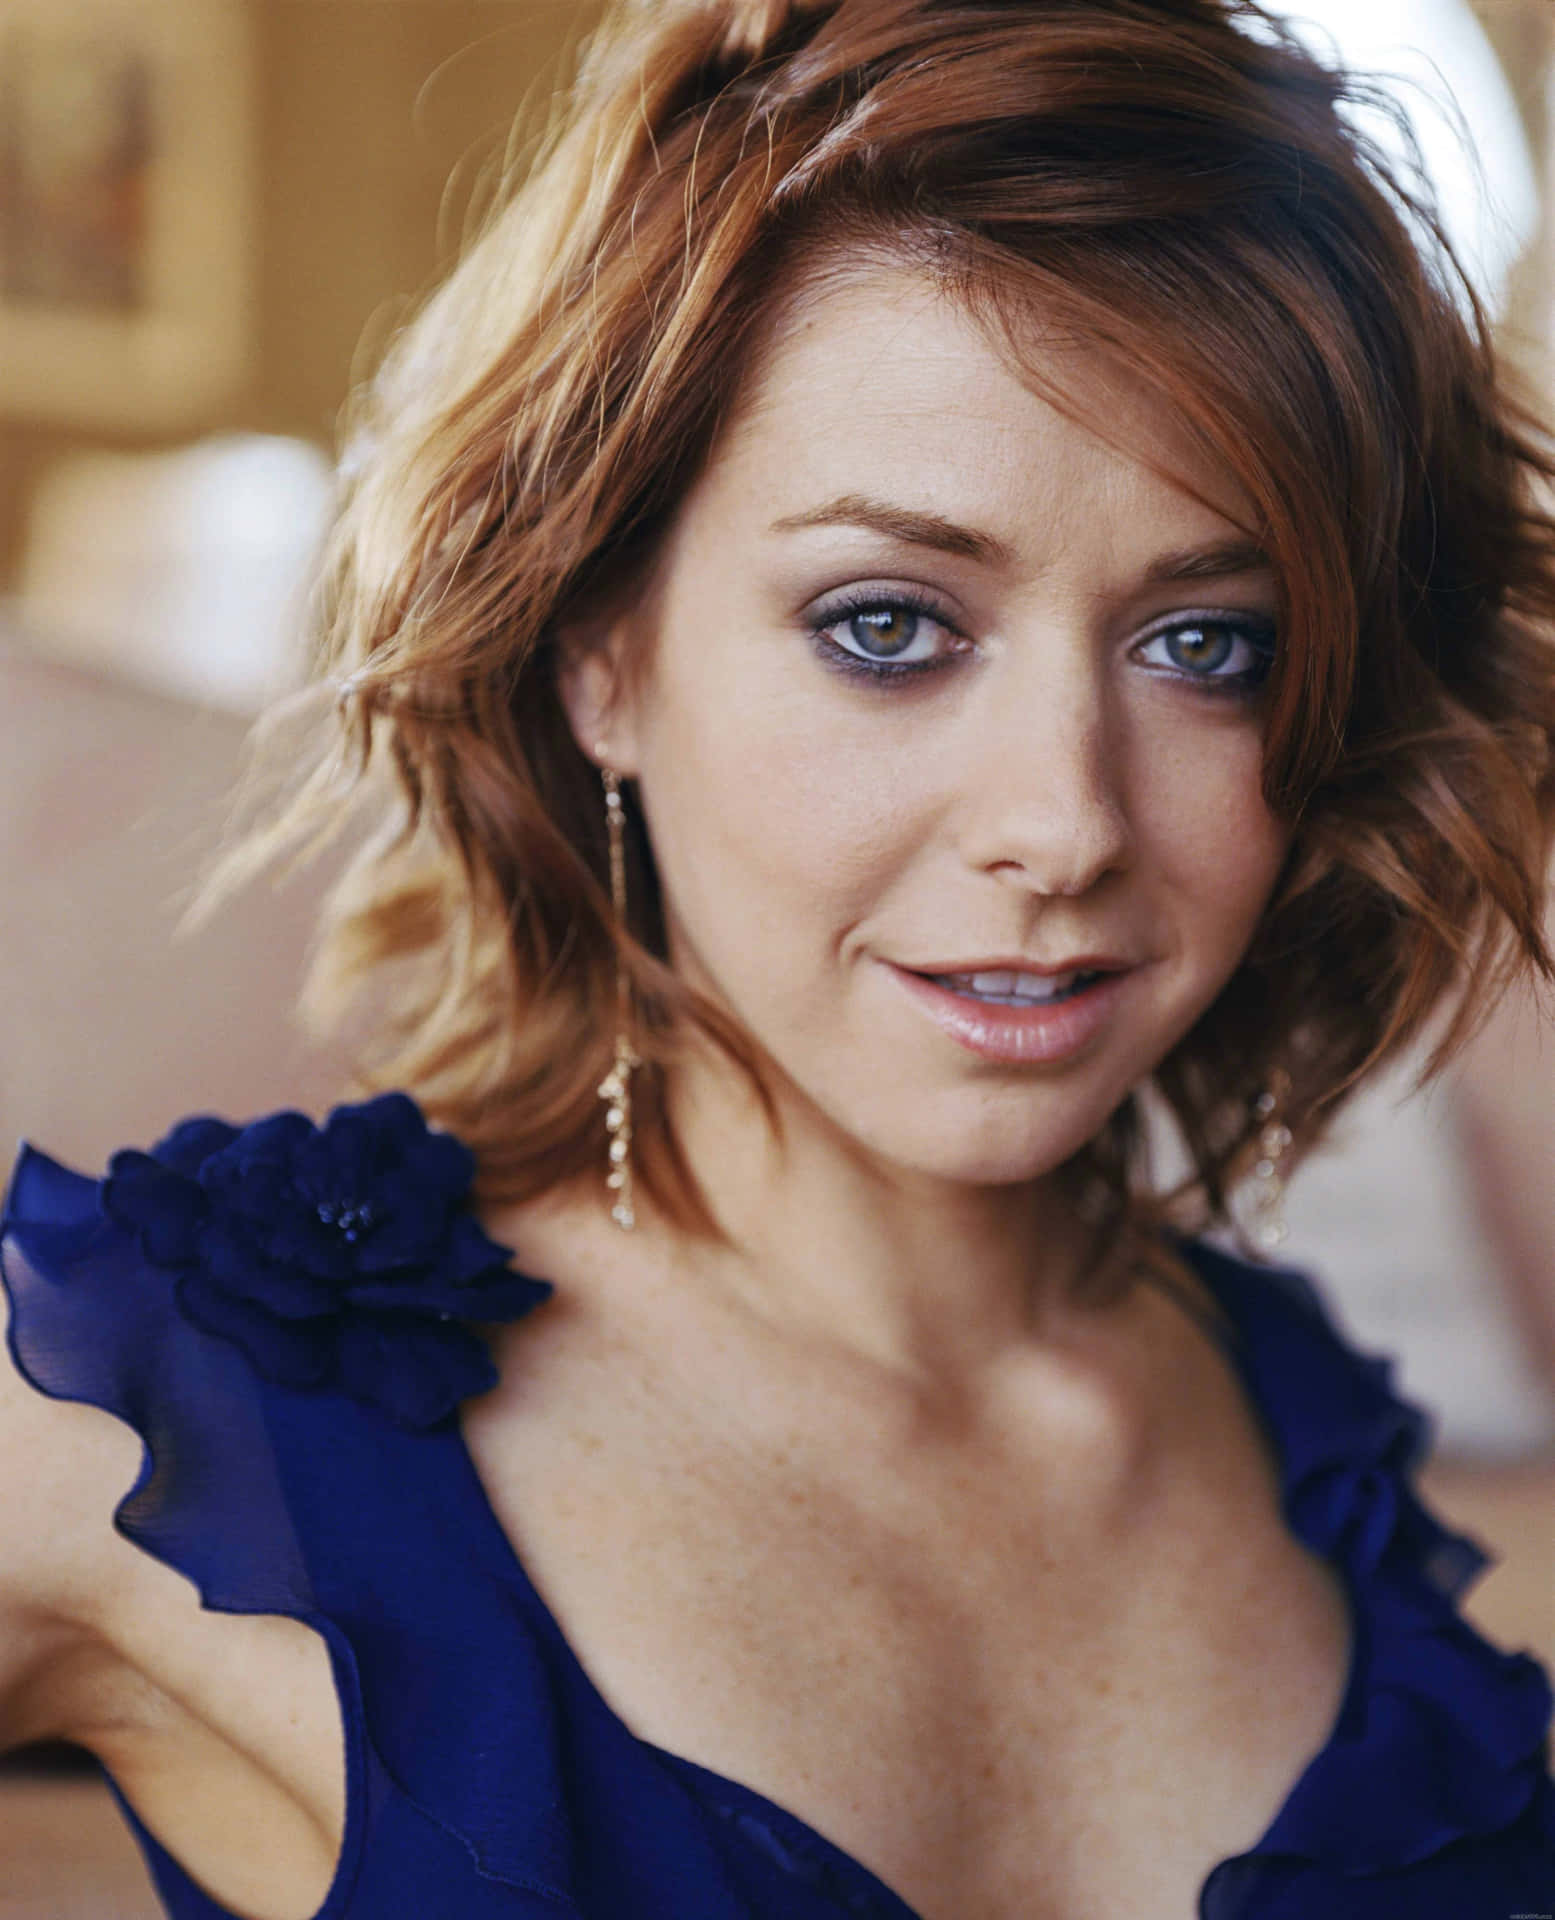 Alyson Hannigan smiling in a stunning photoshoot Wallpaper